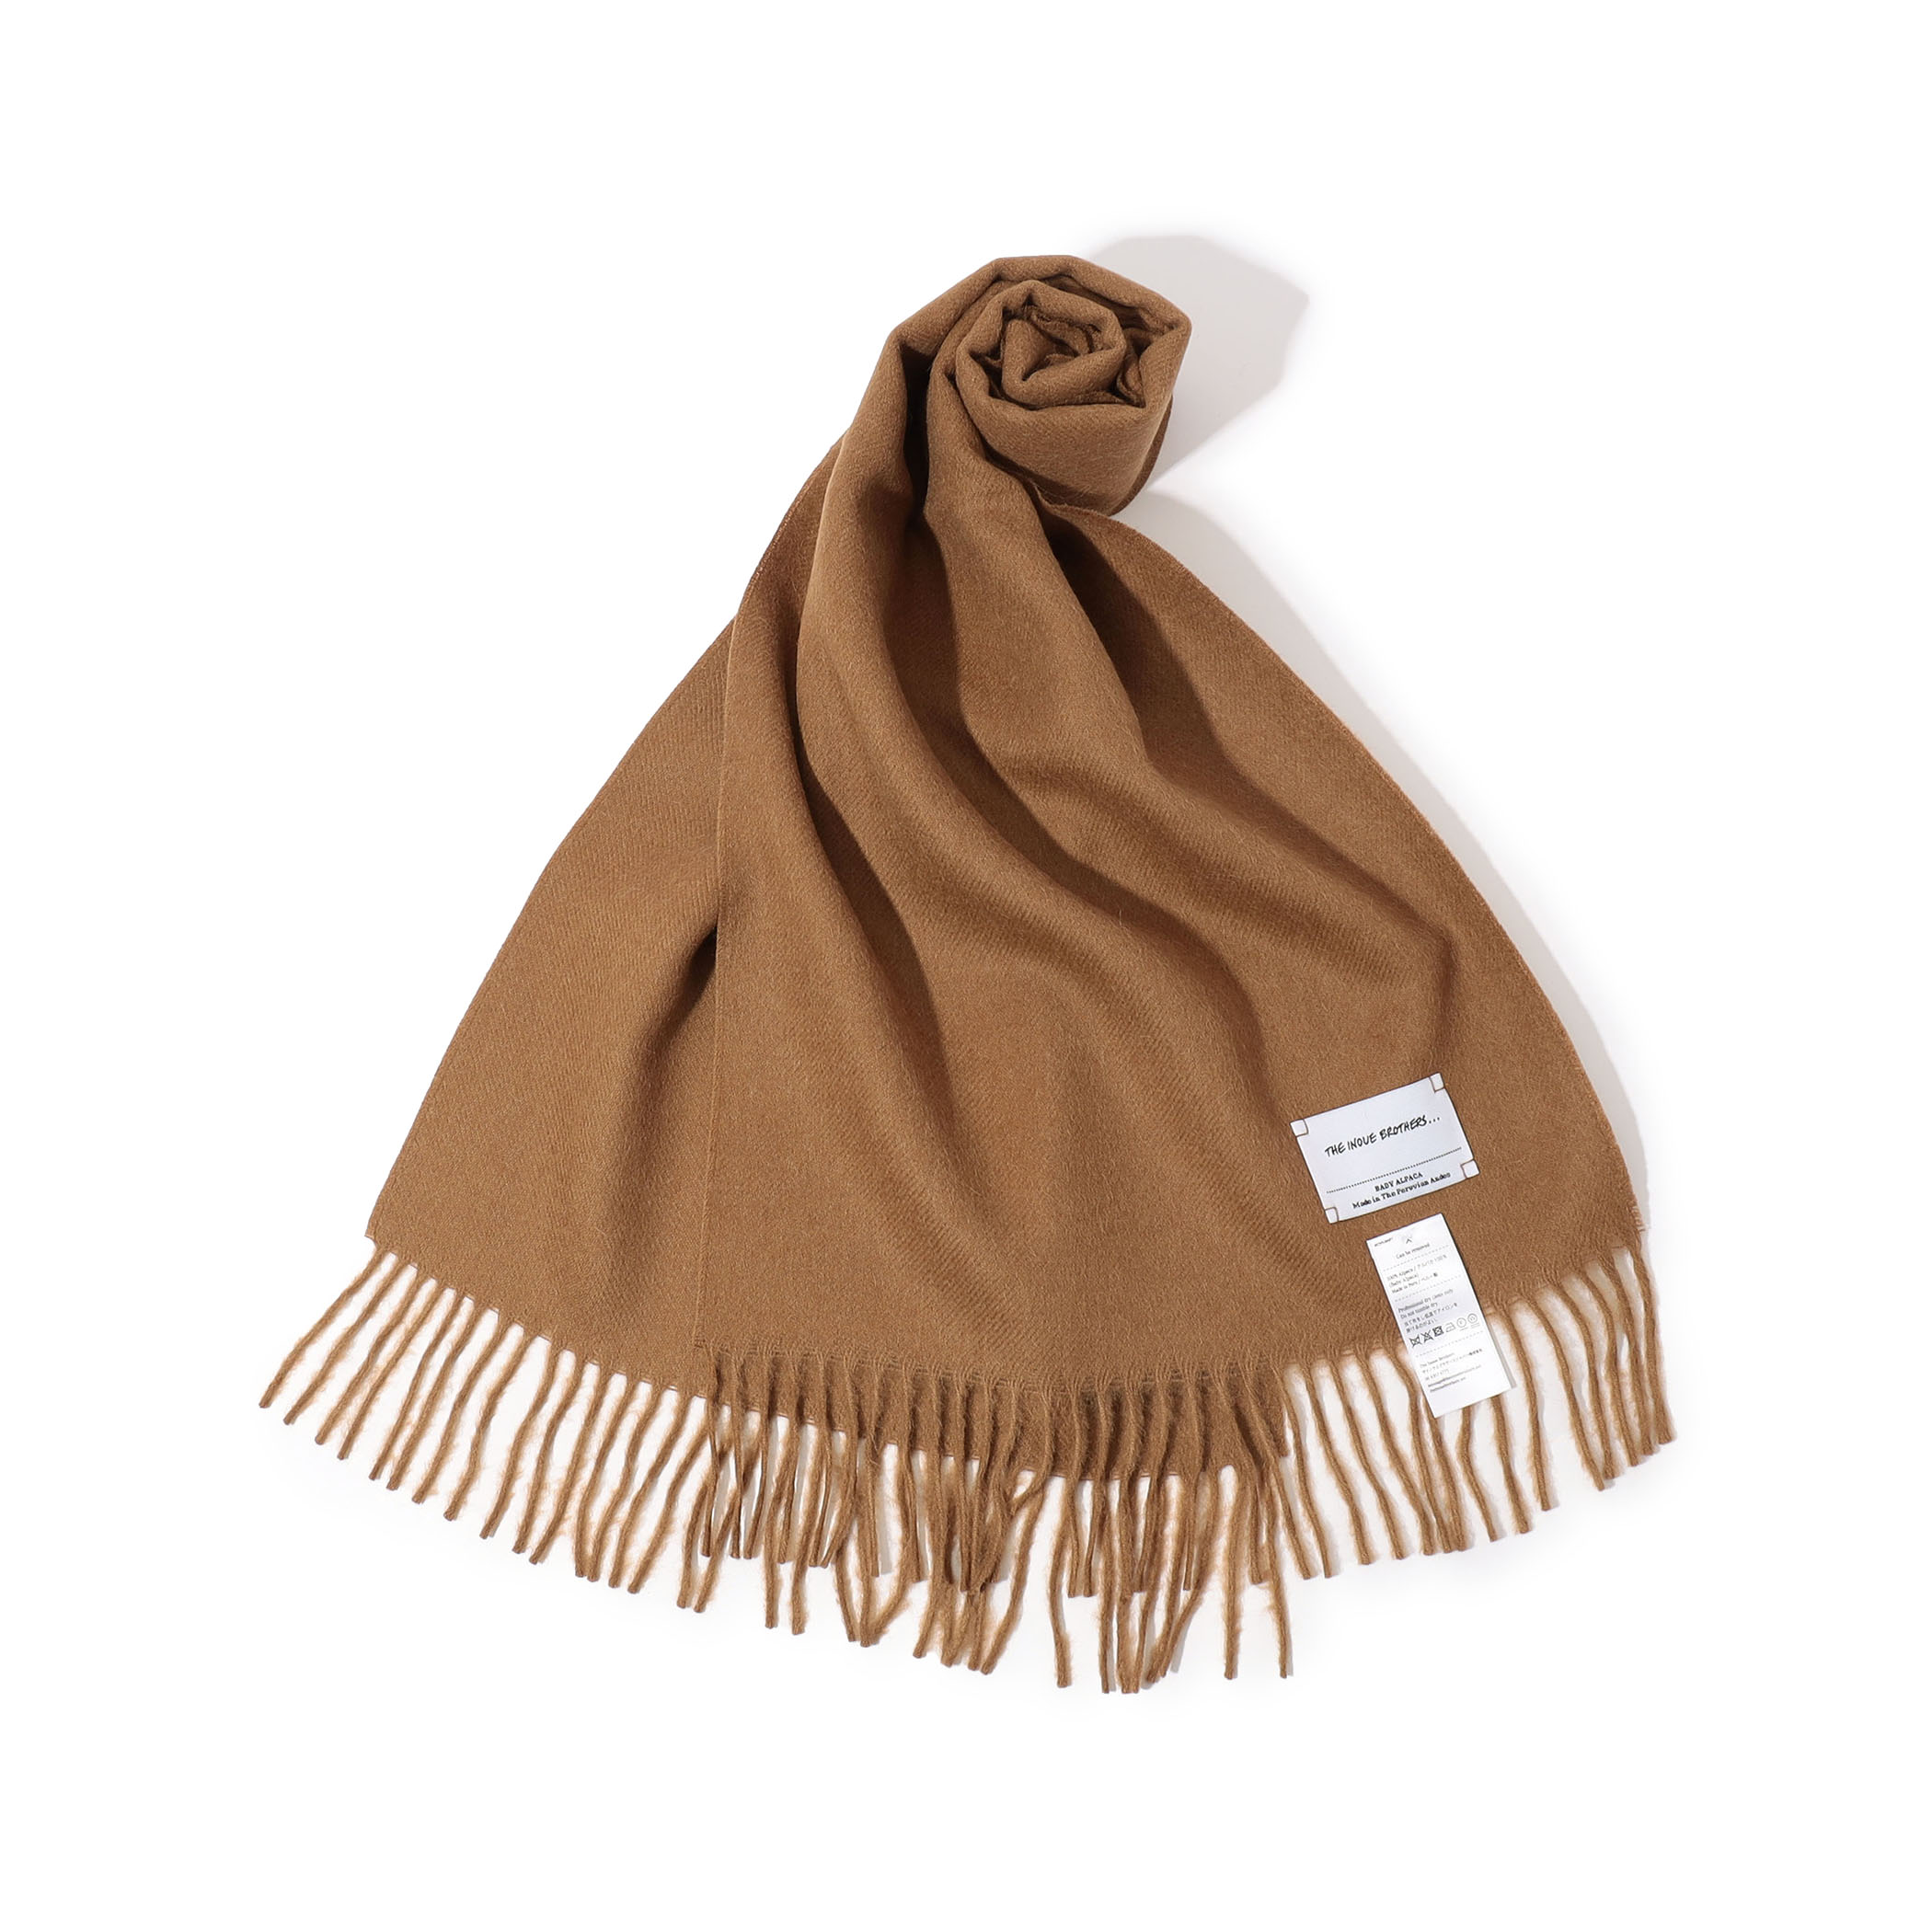 THE INOUE BROTHERS Brushed Scarf アルパカ ストール